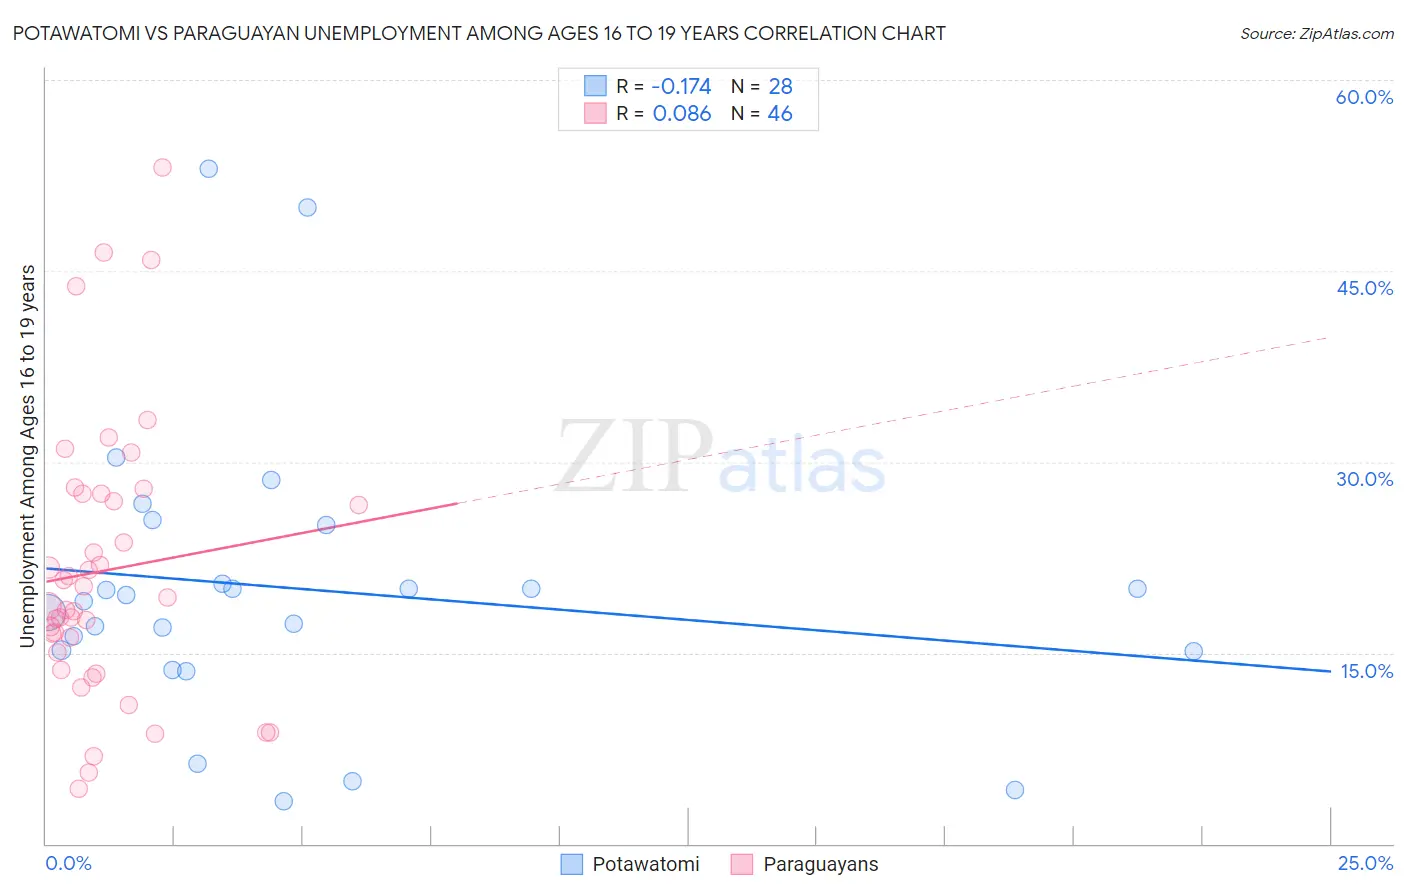 Potawatomi vs Paraguayan Unemployment Among Ages 16 to 19 years